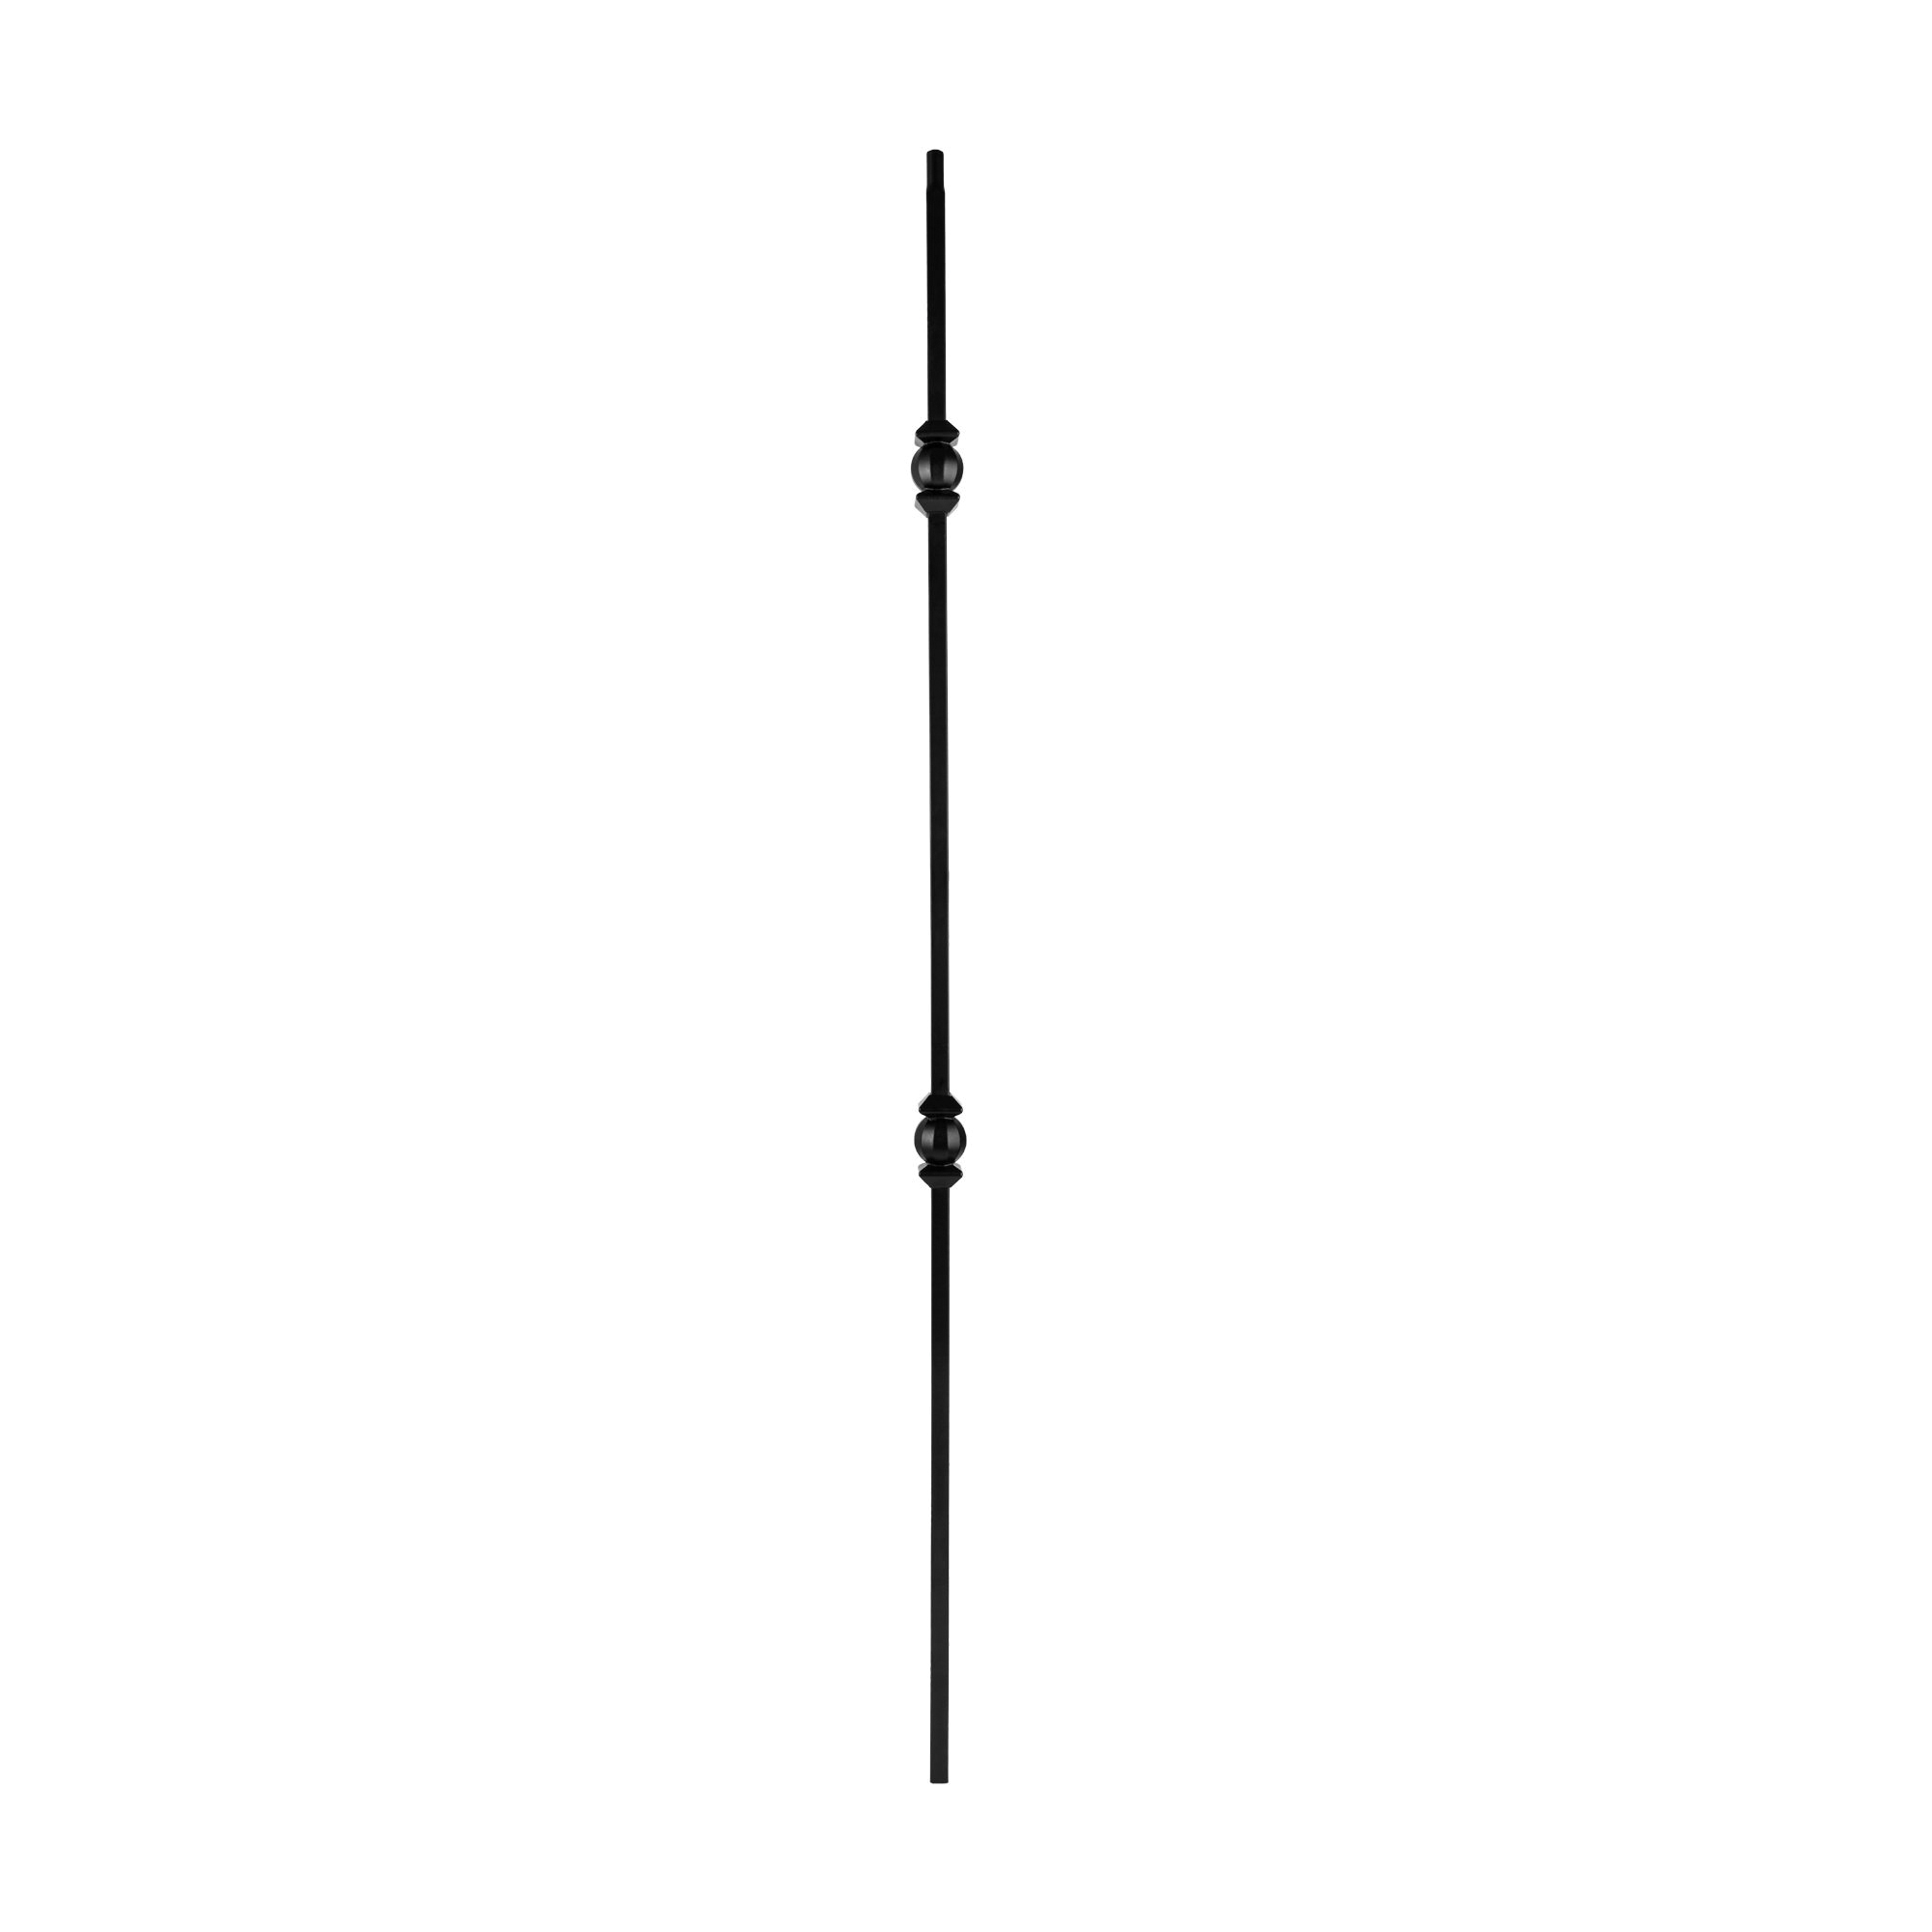 SQI2BS Double Ball and Sphere Stair Baluster, 44 in H, 1/2 in W, Square, Steel, Black